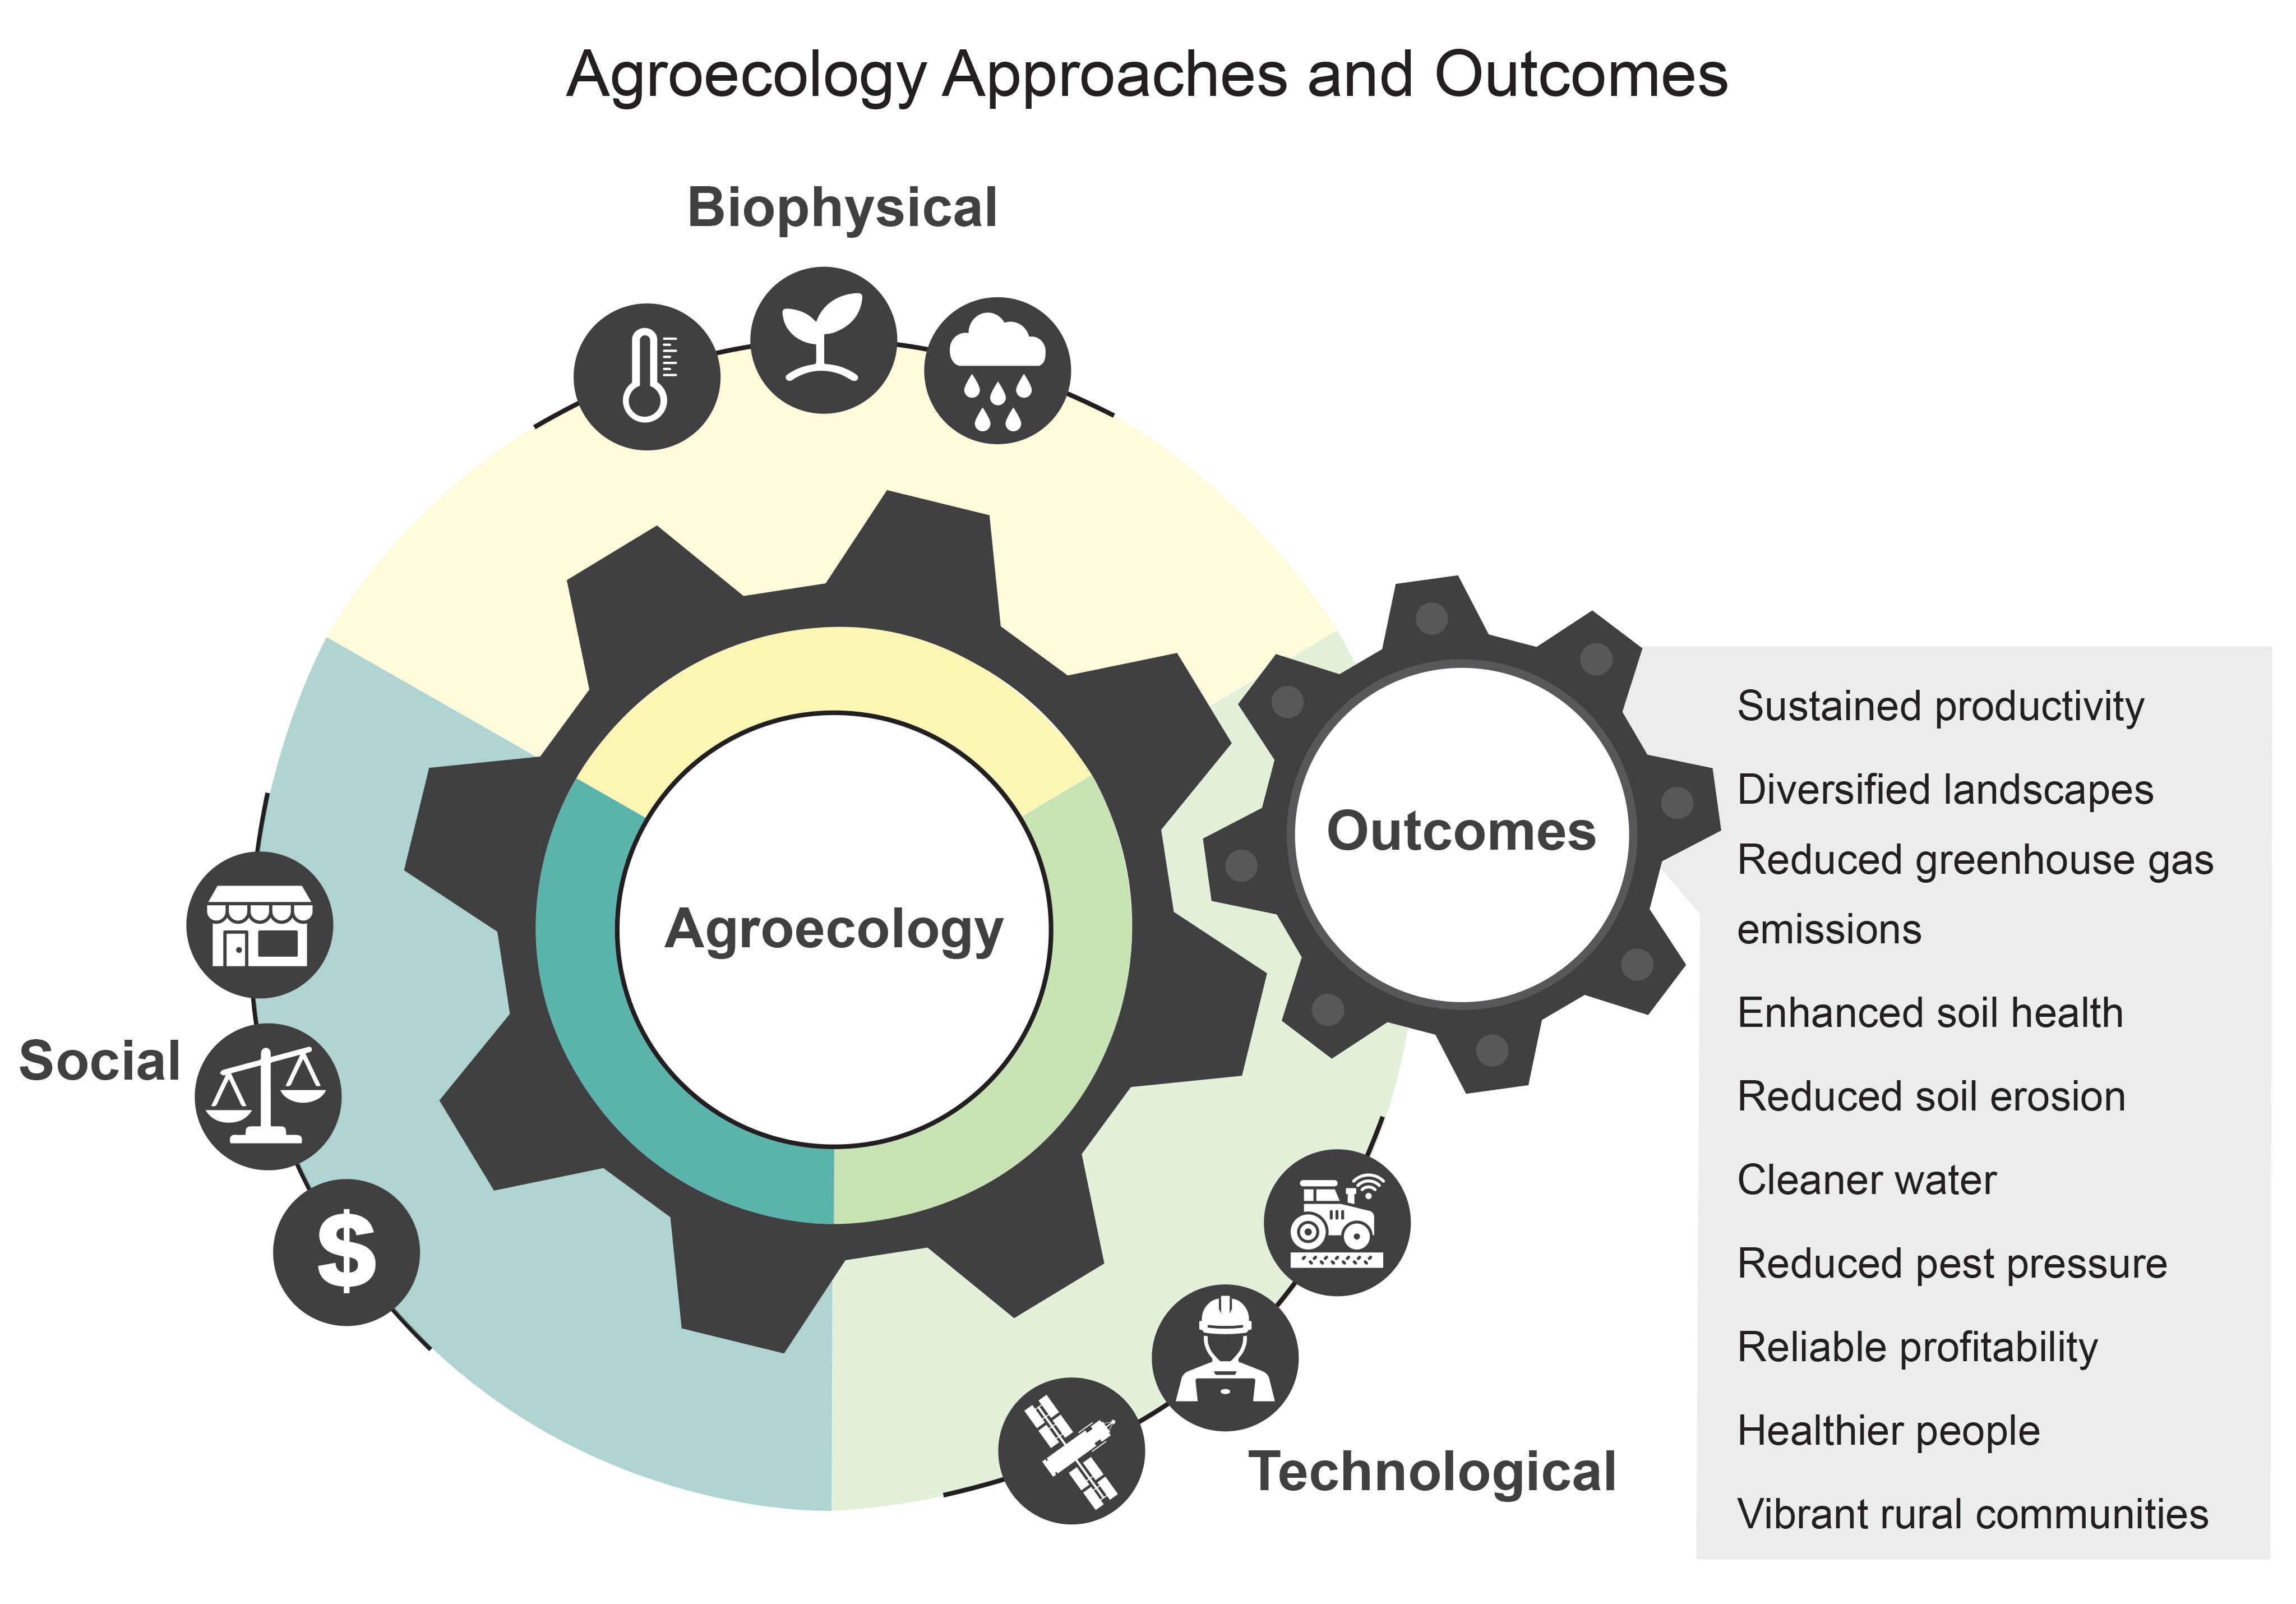 Agroecology Approaches and Outcomes